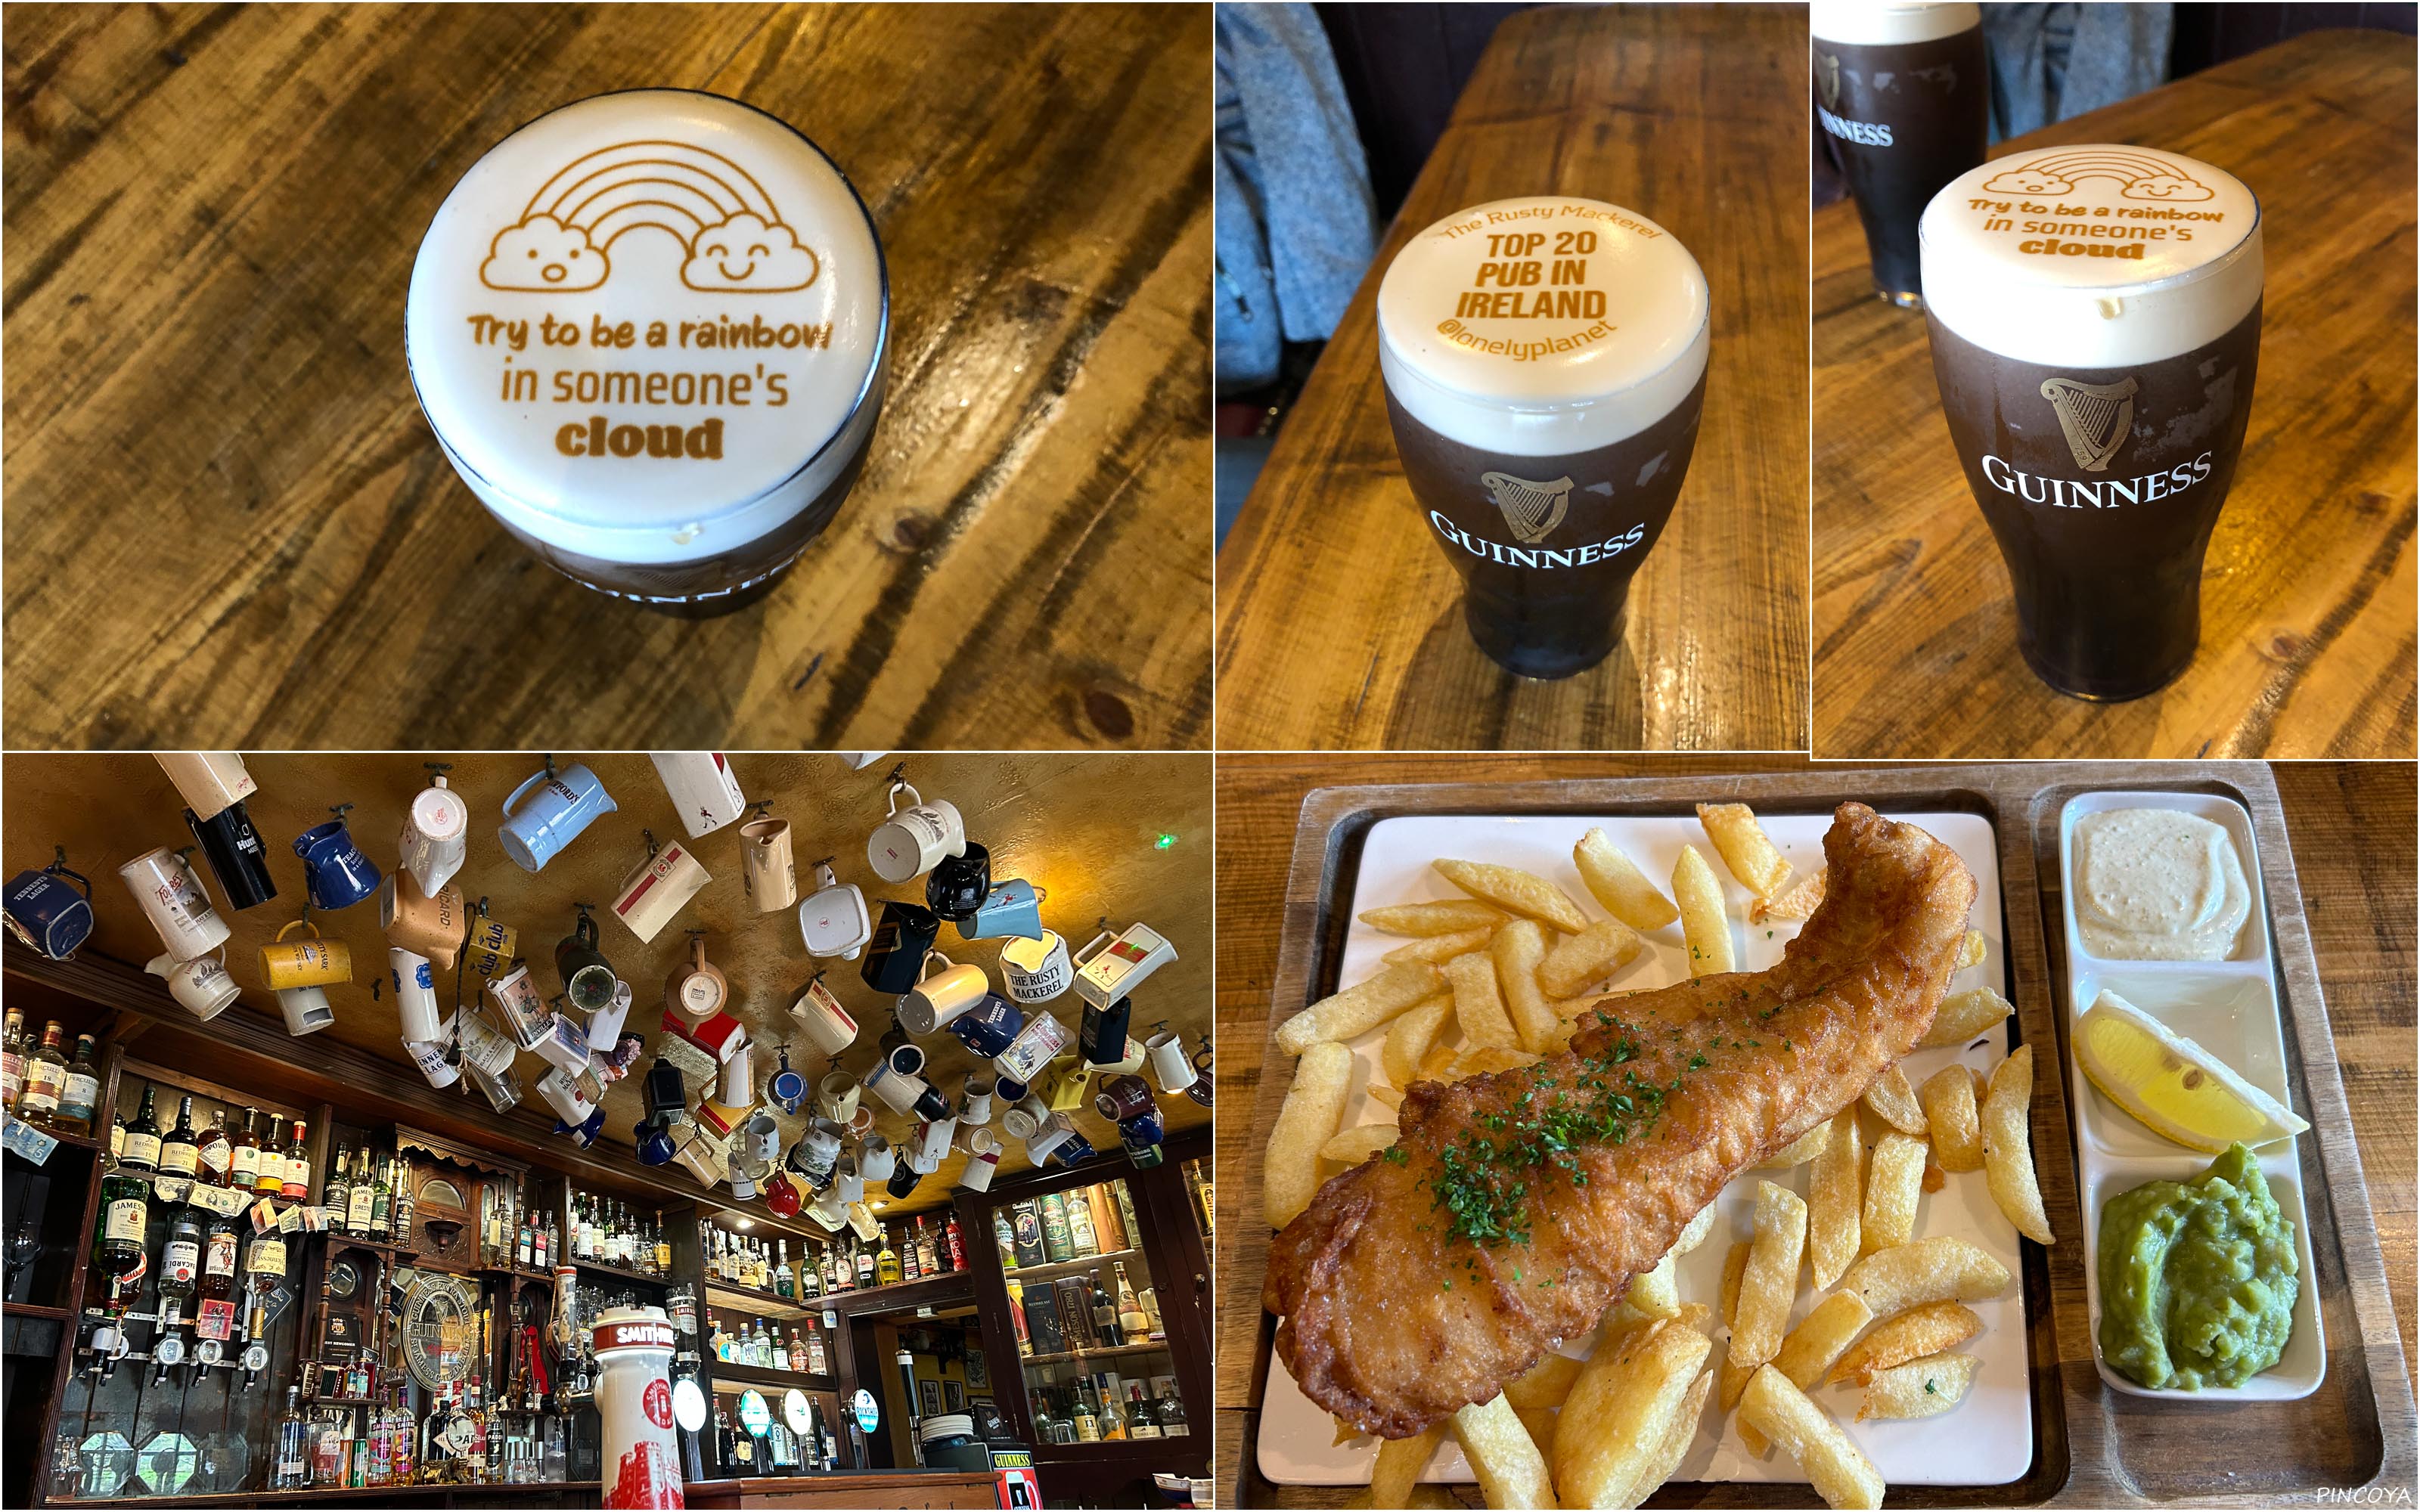 „The catch of the day and a Guinness with branding“